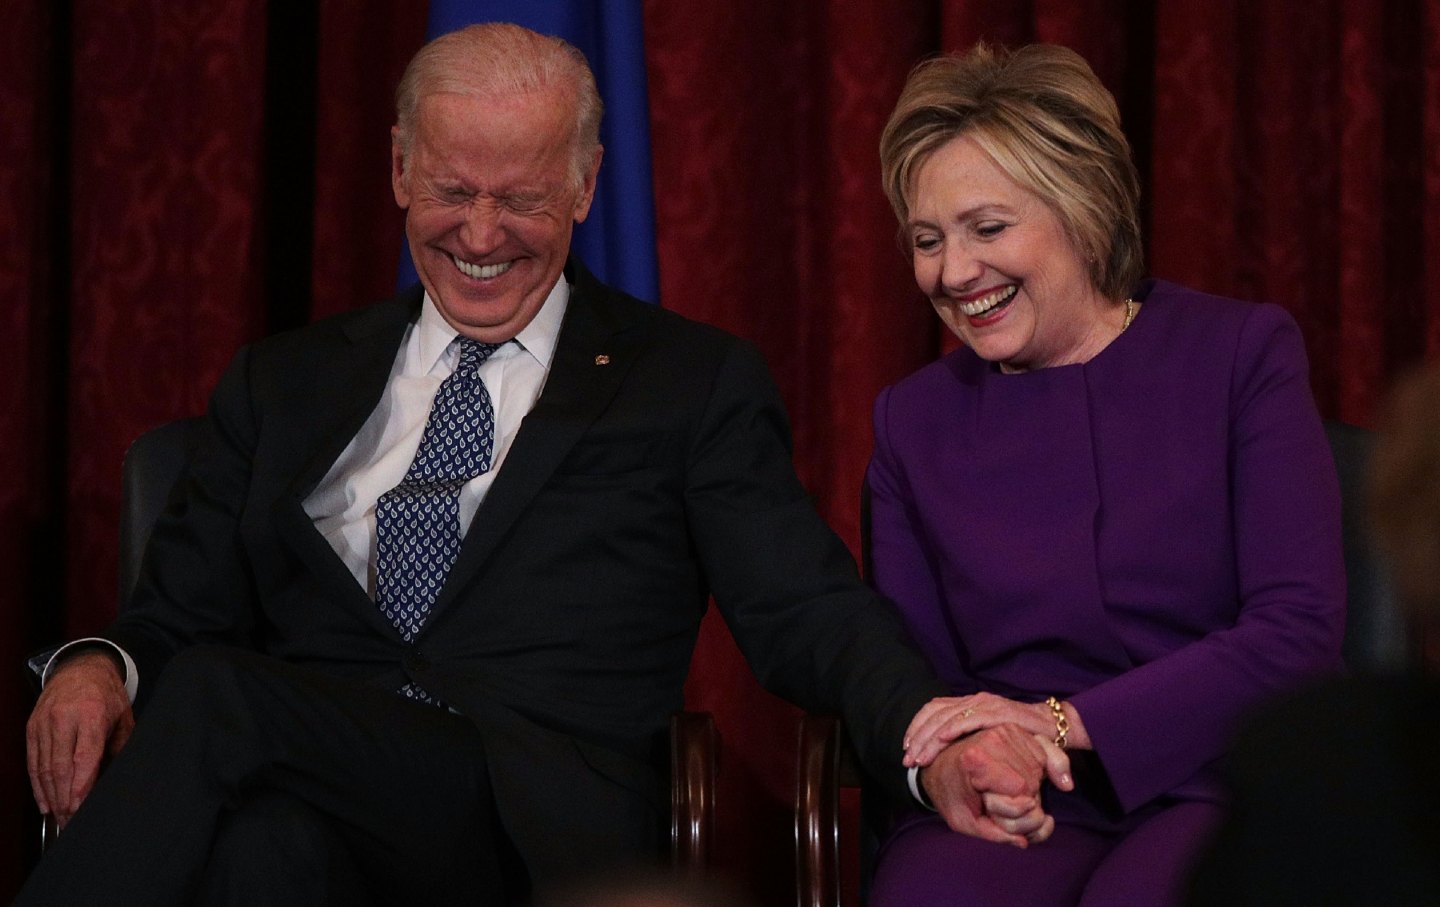 Former US secretary of state Hillary Clinton shares a moment with then–Vice President Joe Biden during a portrait unveiling ceremony for then–Senate minority leader Senator Harry Reid on December 8, 2016.